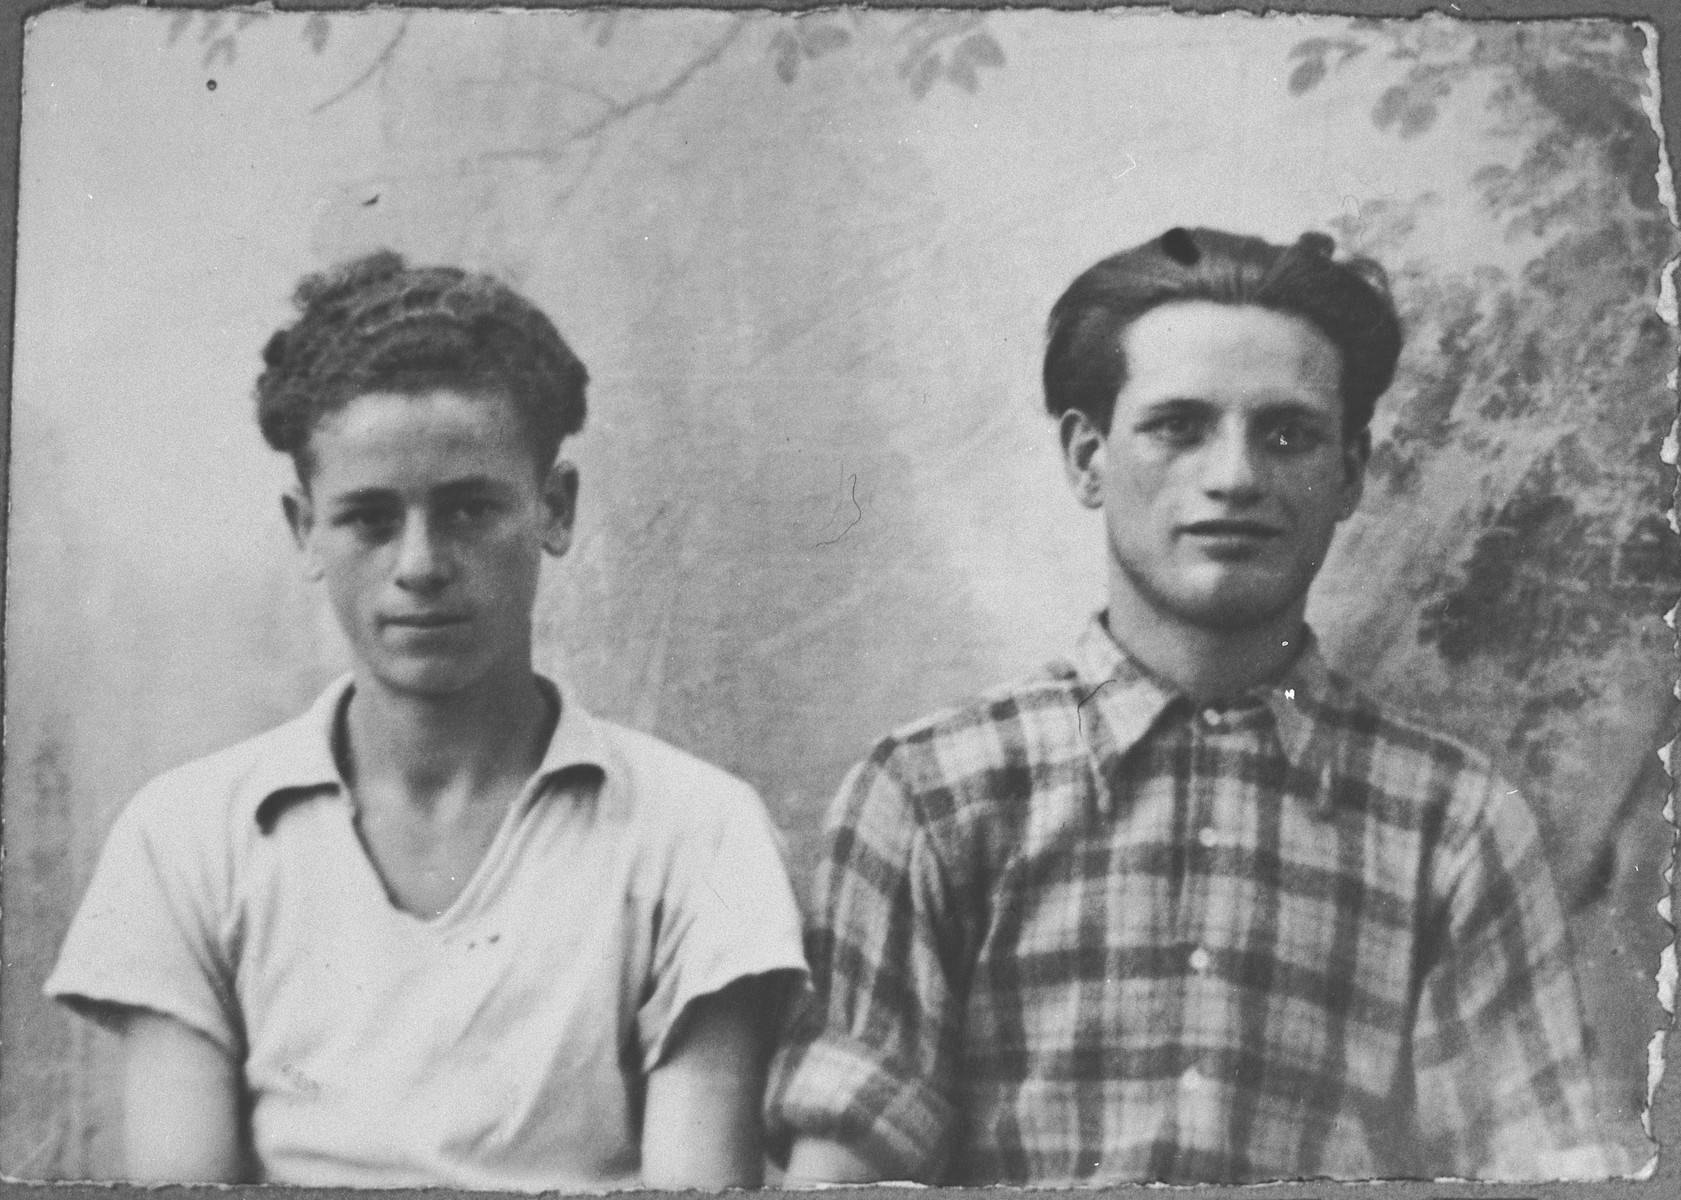 Portrait of Albert (S.) Ergas and Yosef (S.) Ergas, [sons of Saba Ergas].  They were students.  They lived at Karagoryeva 83 in Bitola.